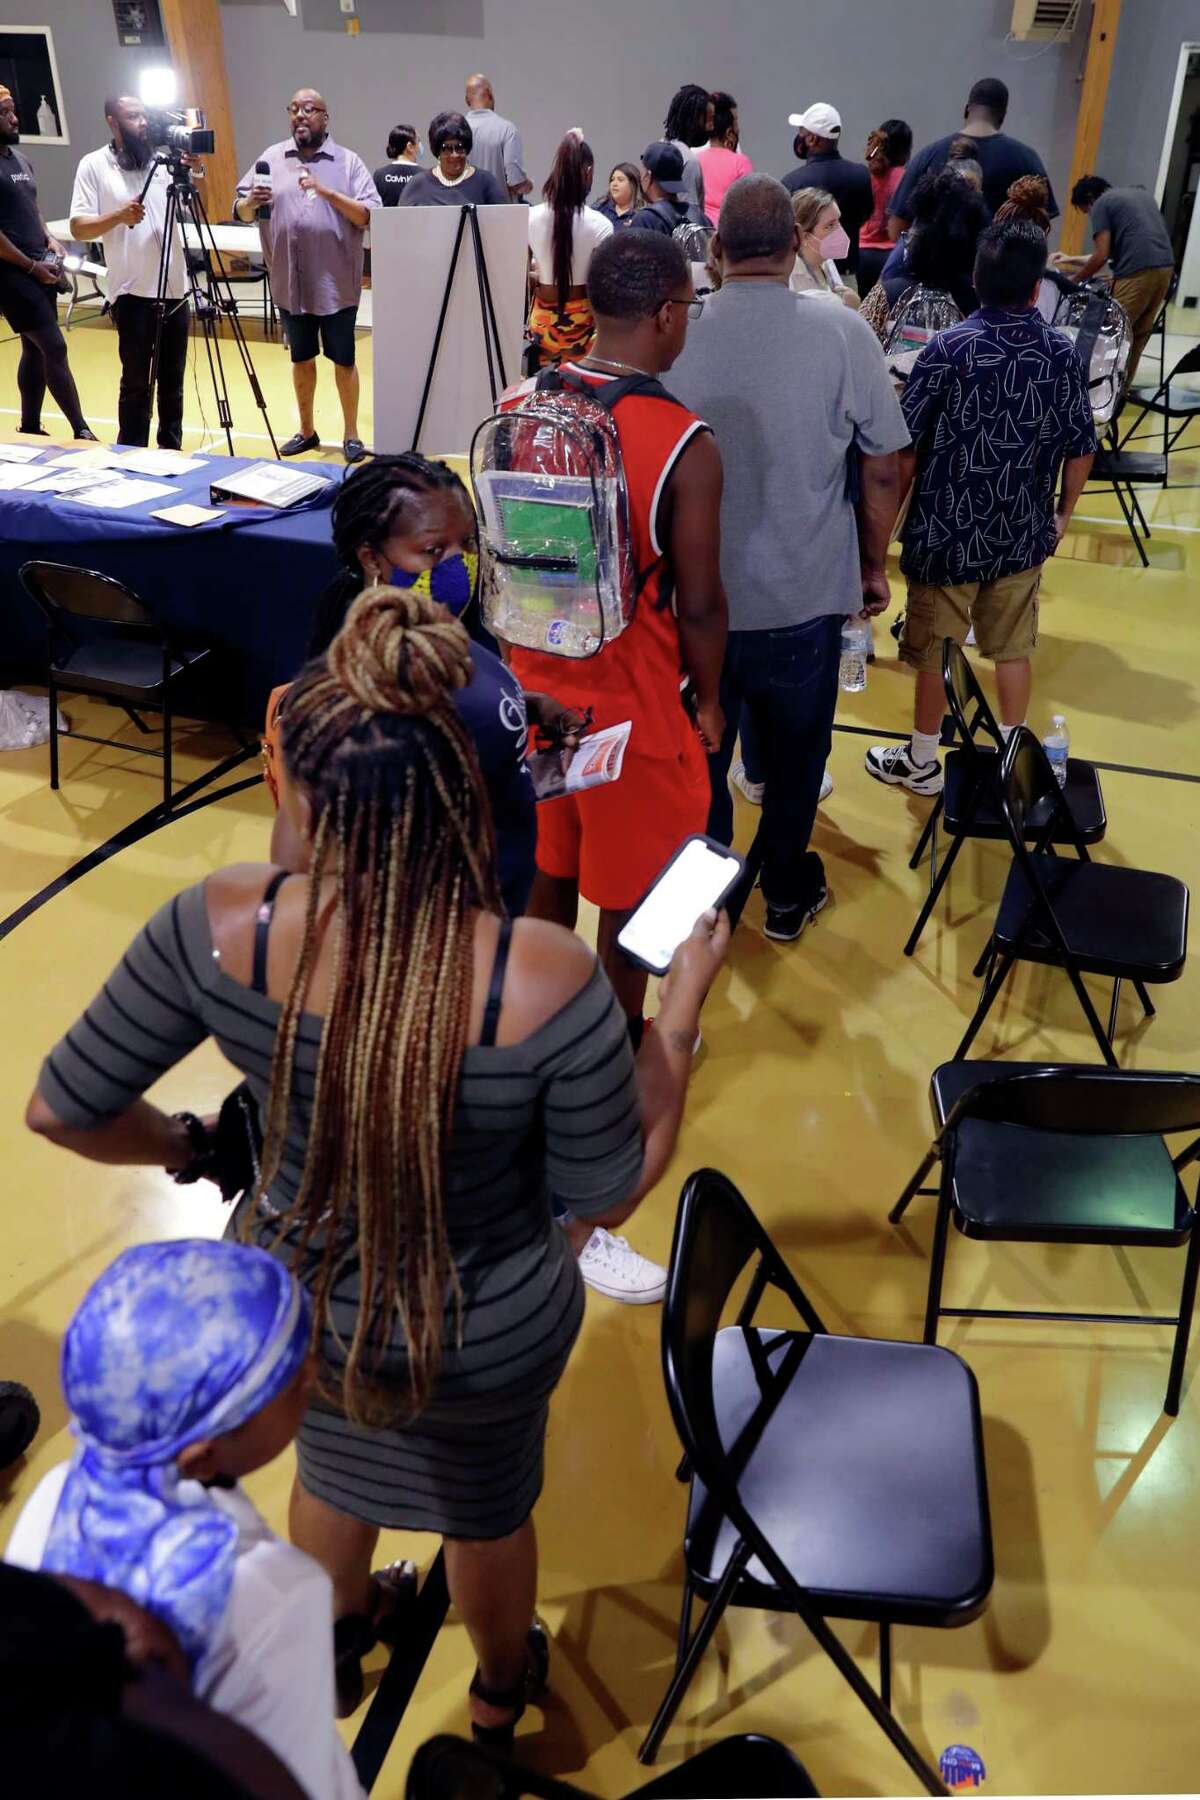 Attendees in line during a Harris County event where public defenders help misdemeanor offenders apply to have their convictions sealed or expunged, held at Victory International Chursh Saturday, Jul. 30, 2022 in Houston, TX.